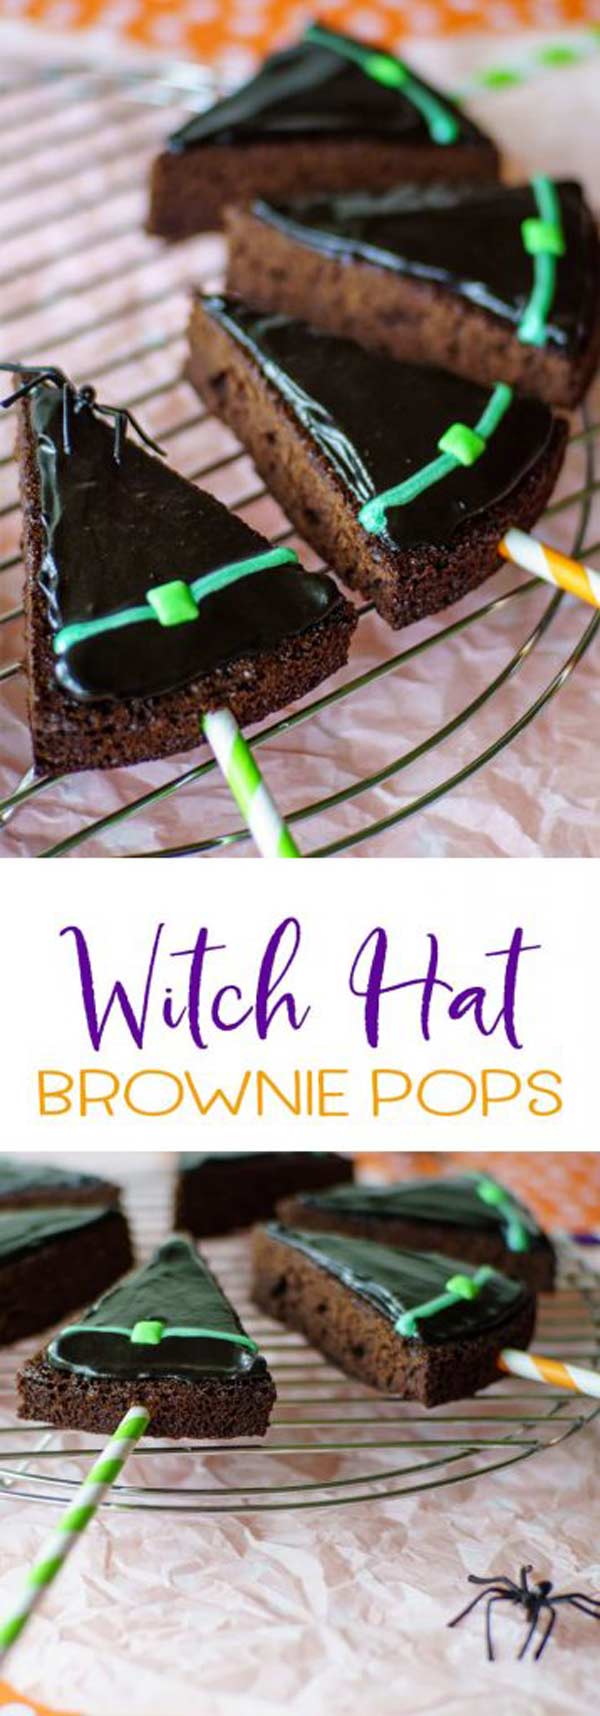 Witch hat brownie pops will be the hit of your Halloween party! Simple to make with a box brownie mix, fast frosting, and an easy piping method! #Halloween #Halloweendesserts #Halloweenparty #MHTAW via @mrsmajorhoff